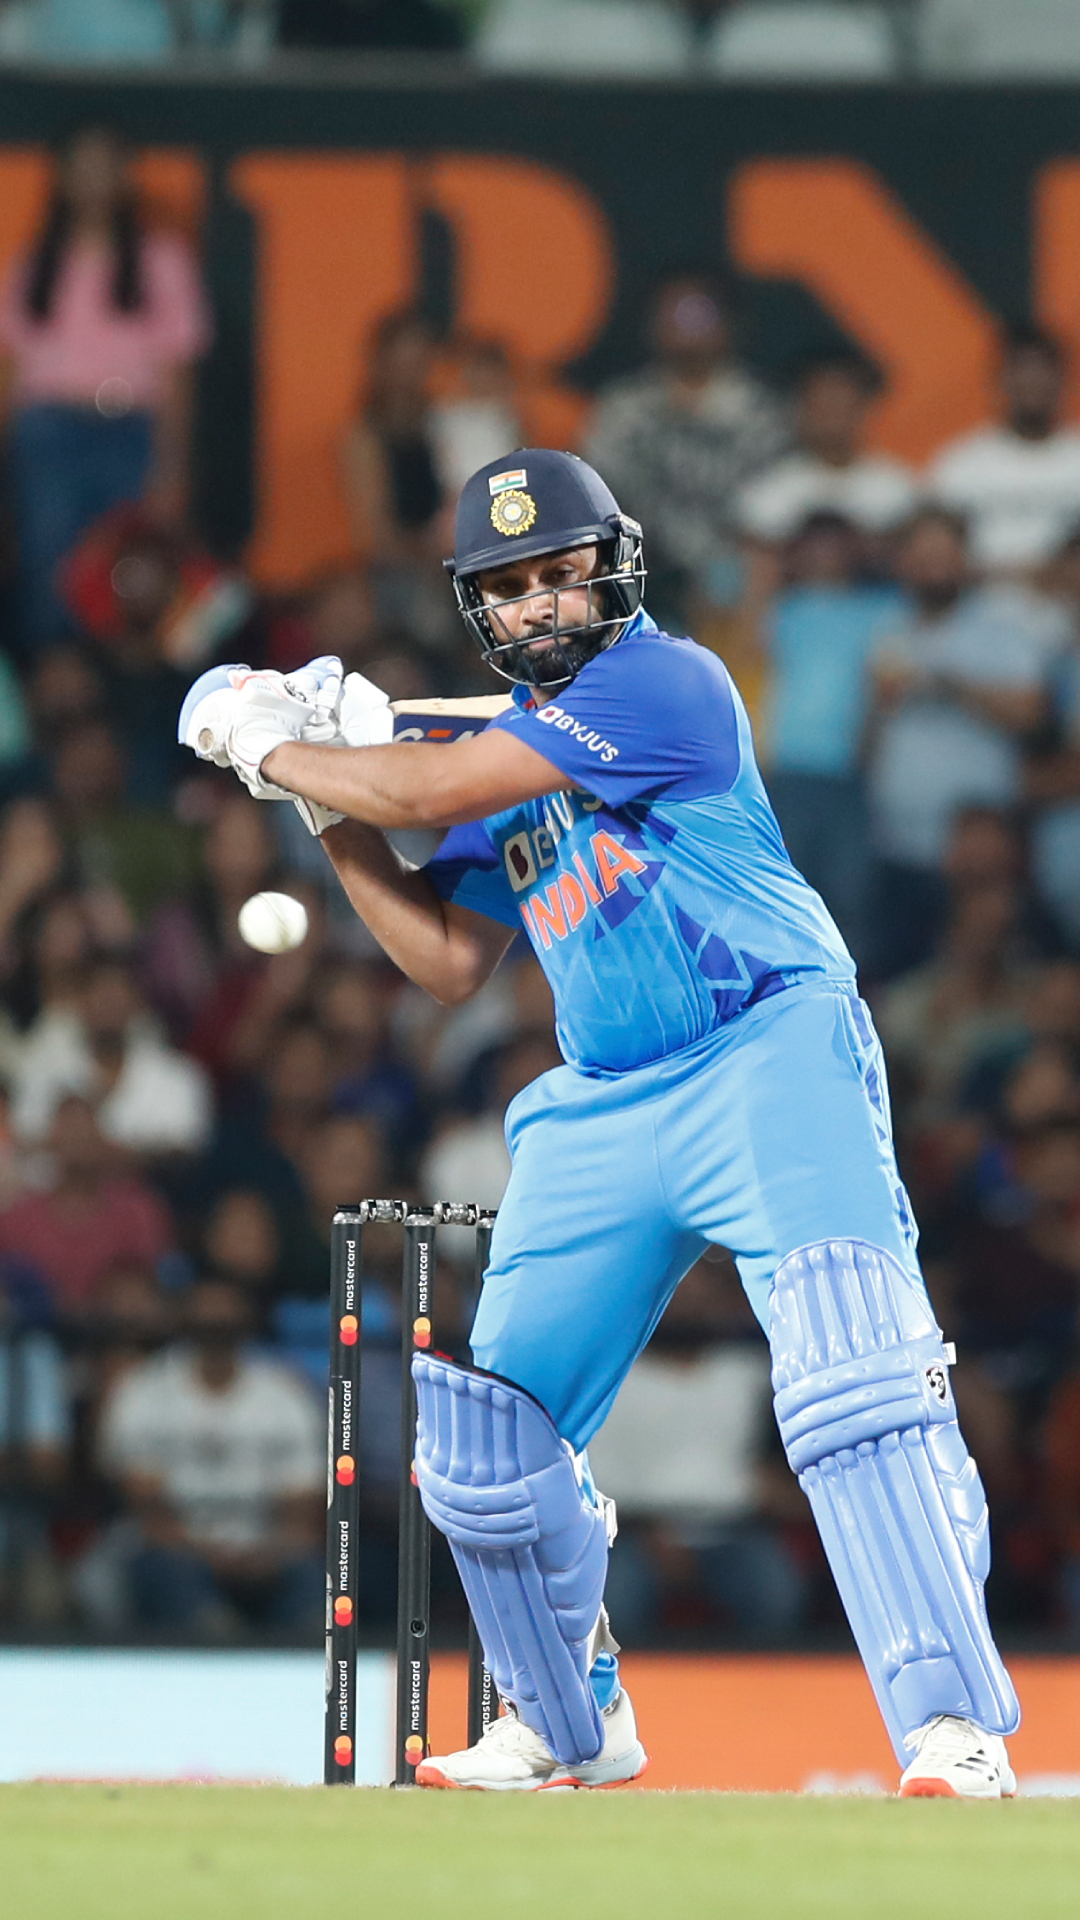 Rohit Sharma leads the list of Indian players with most T20 matches, here are the top 5